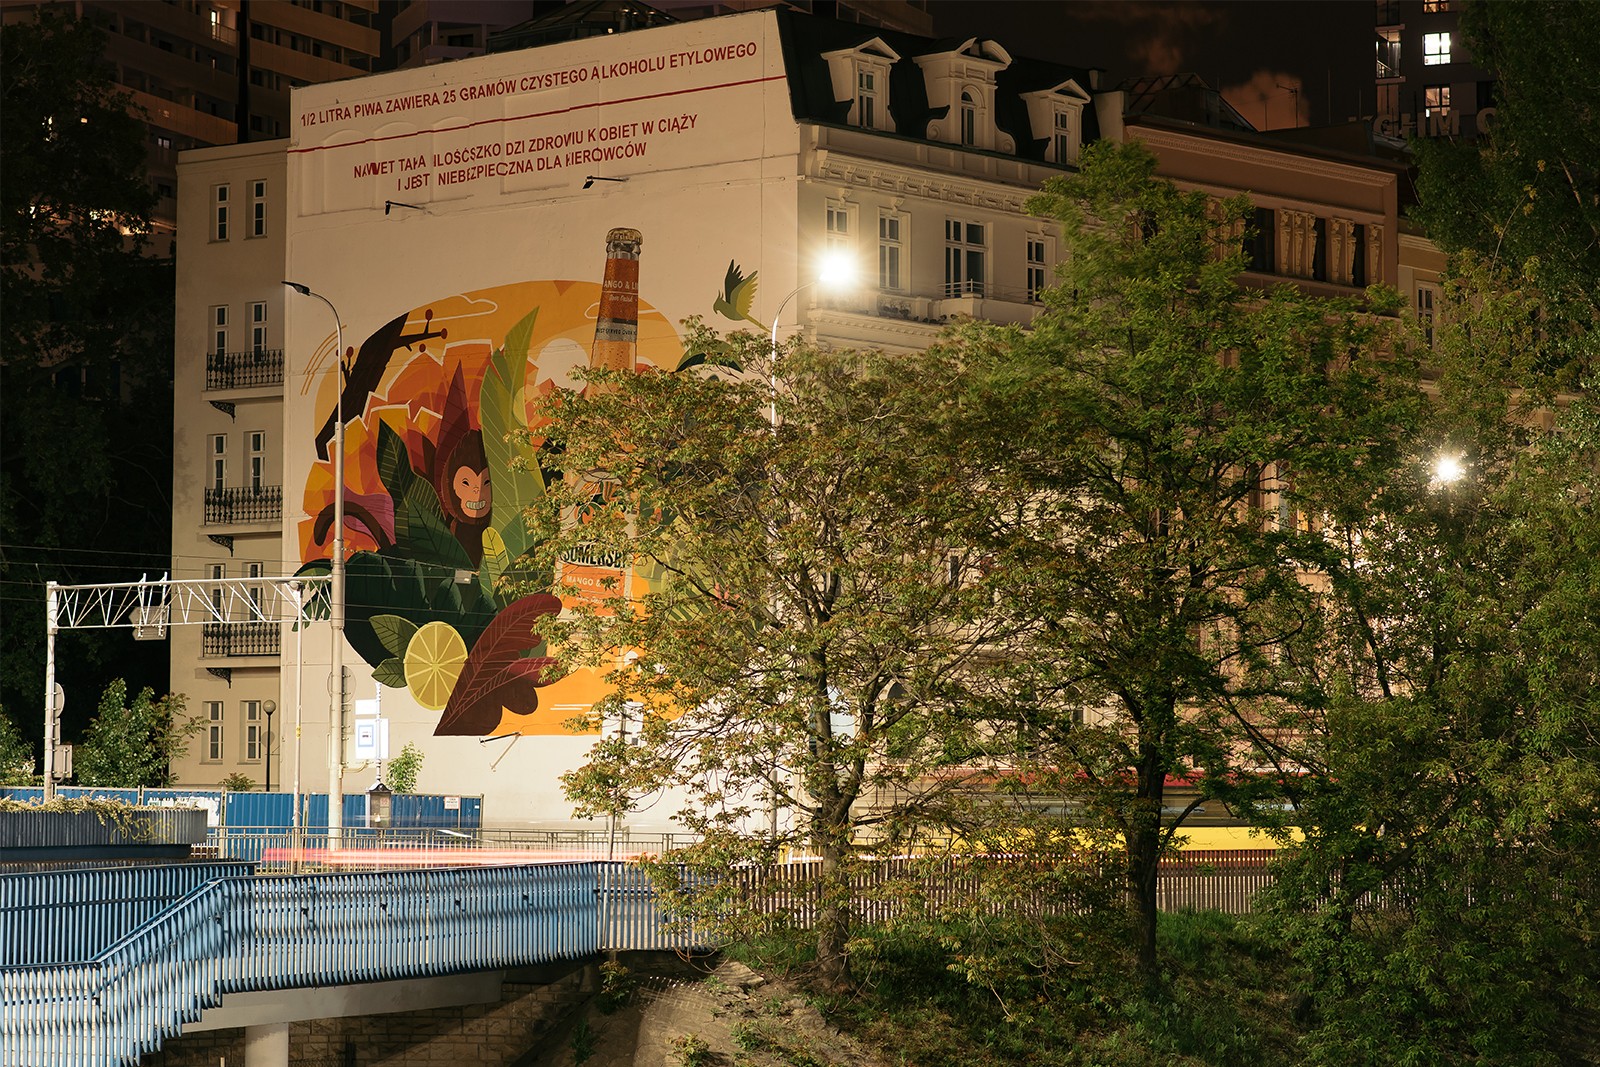 Mural reklamowy Somersby Mango Lime Podwale we Wrocławiu | Somersby Mango & Lime | Portfolio